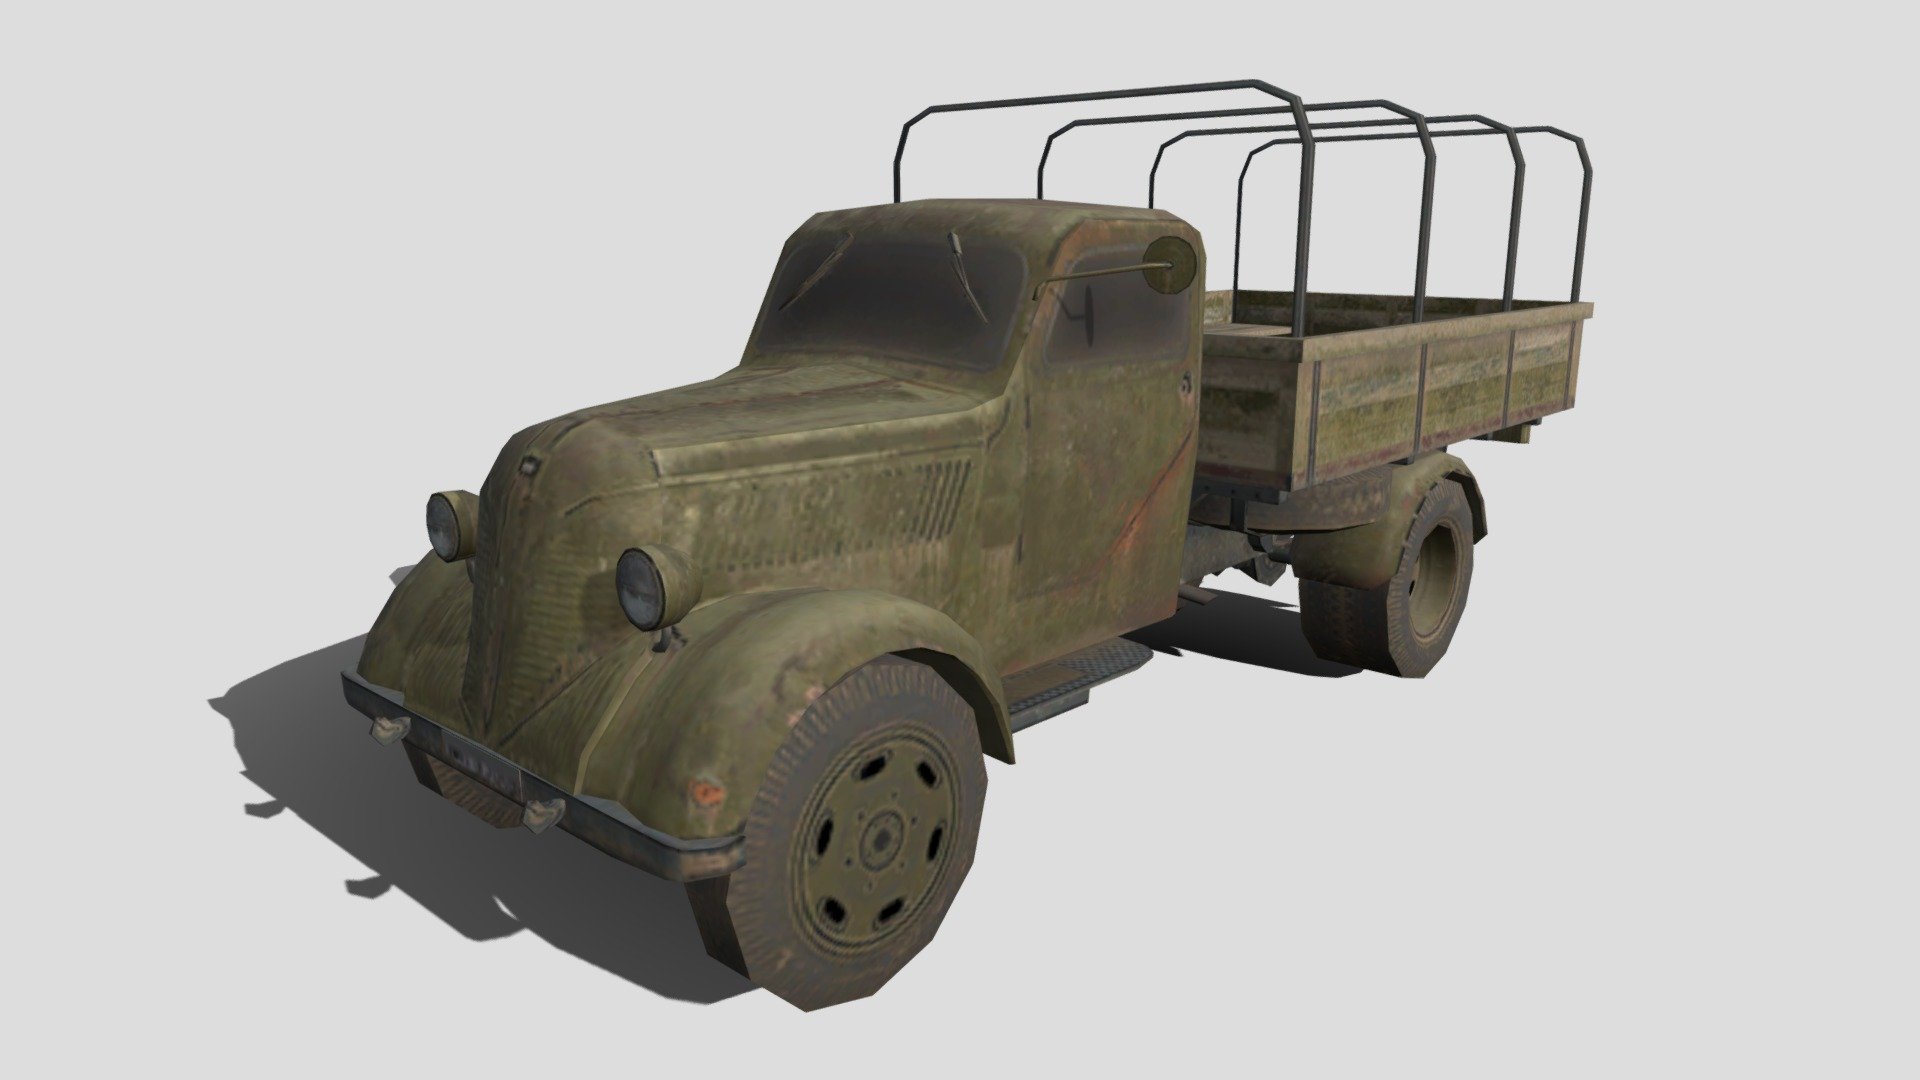 Lowpoly historic dummy-truck model for background or for further development.

Including 3D printing file 3d model